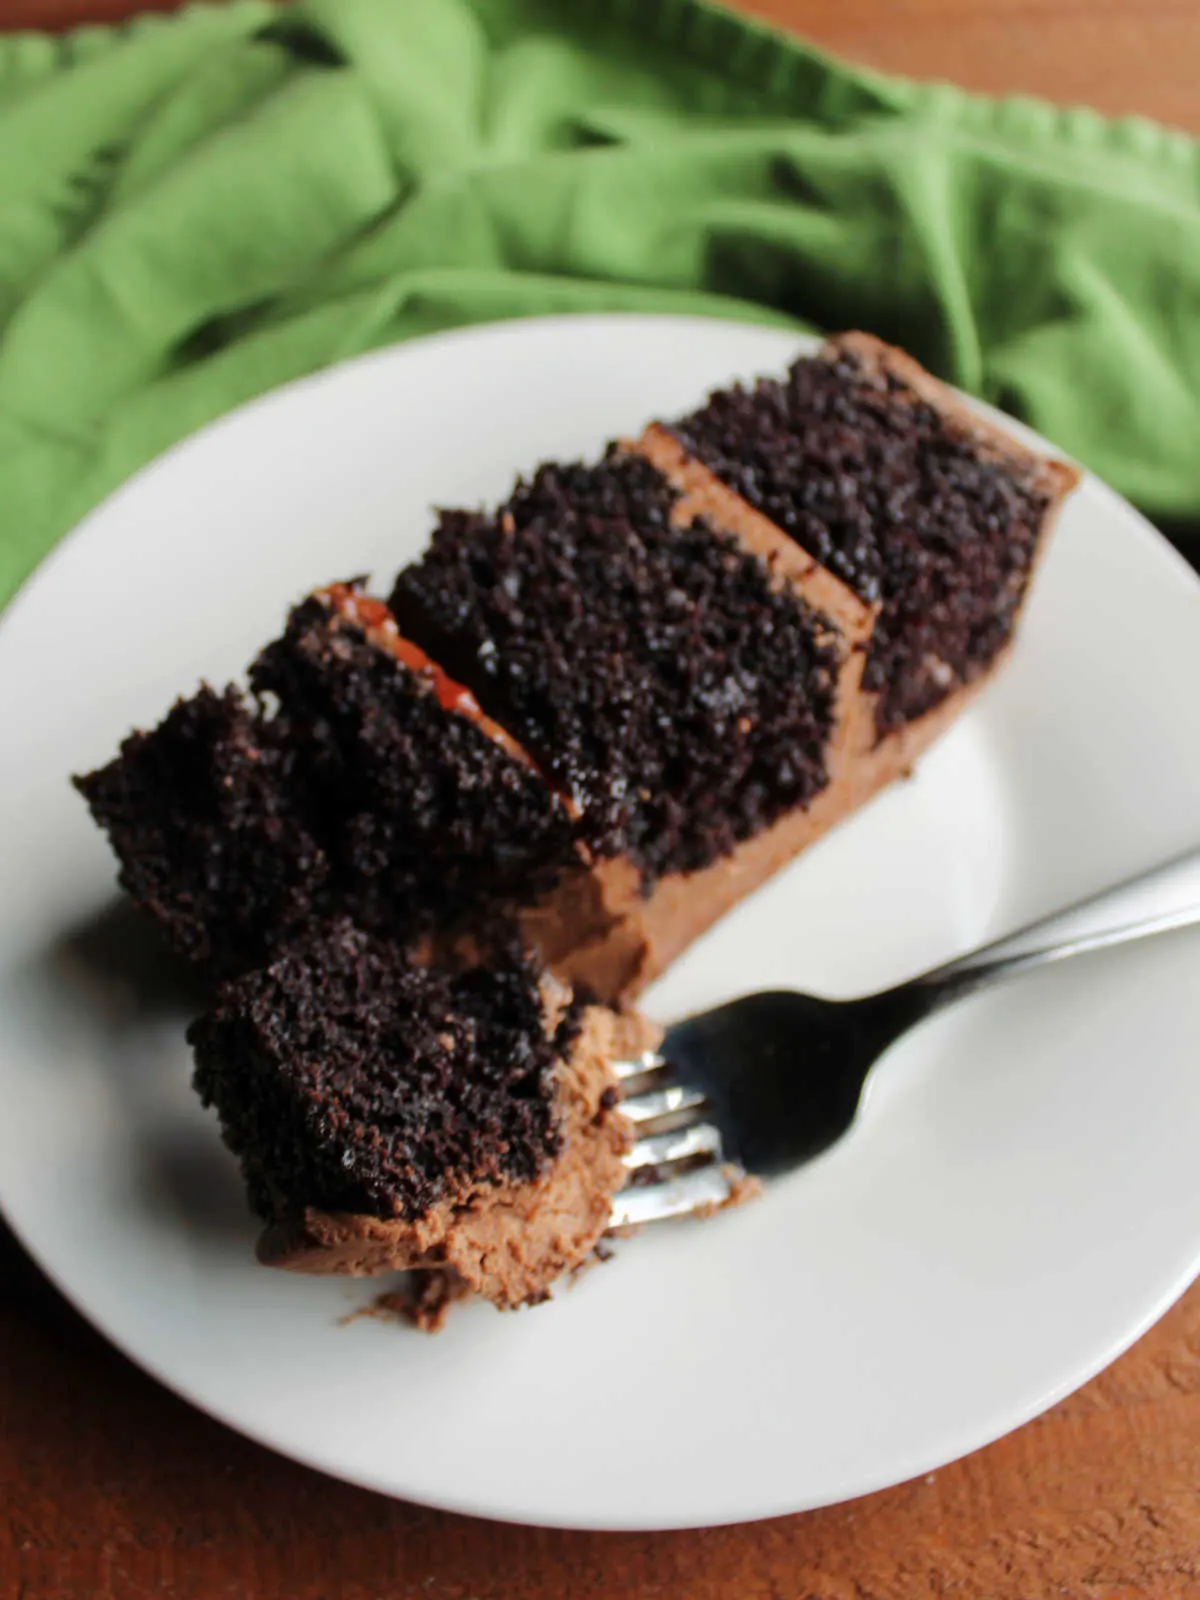 Bite of rich chocolate cake on fork, ready to eat with remaining slice on plate showing dark chocolate cake, plenty of chocolate buttercream, and some raspberry filling.